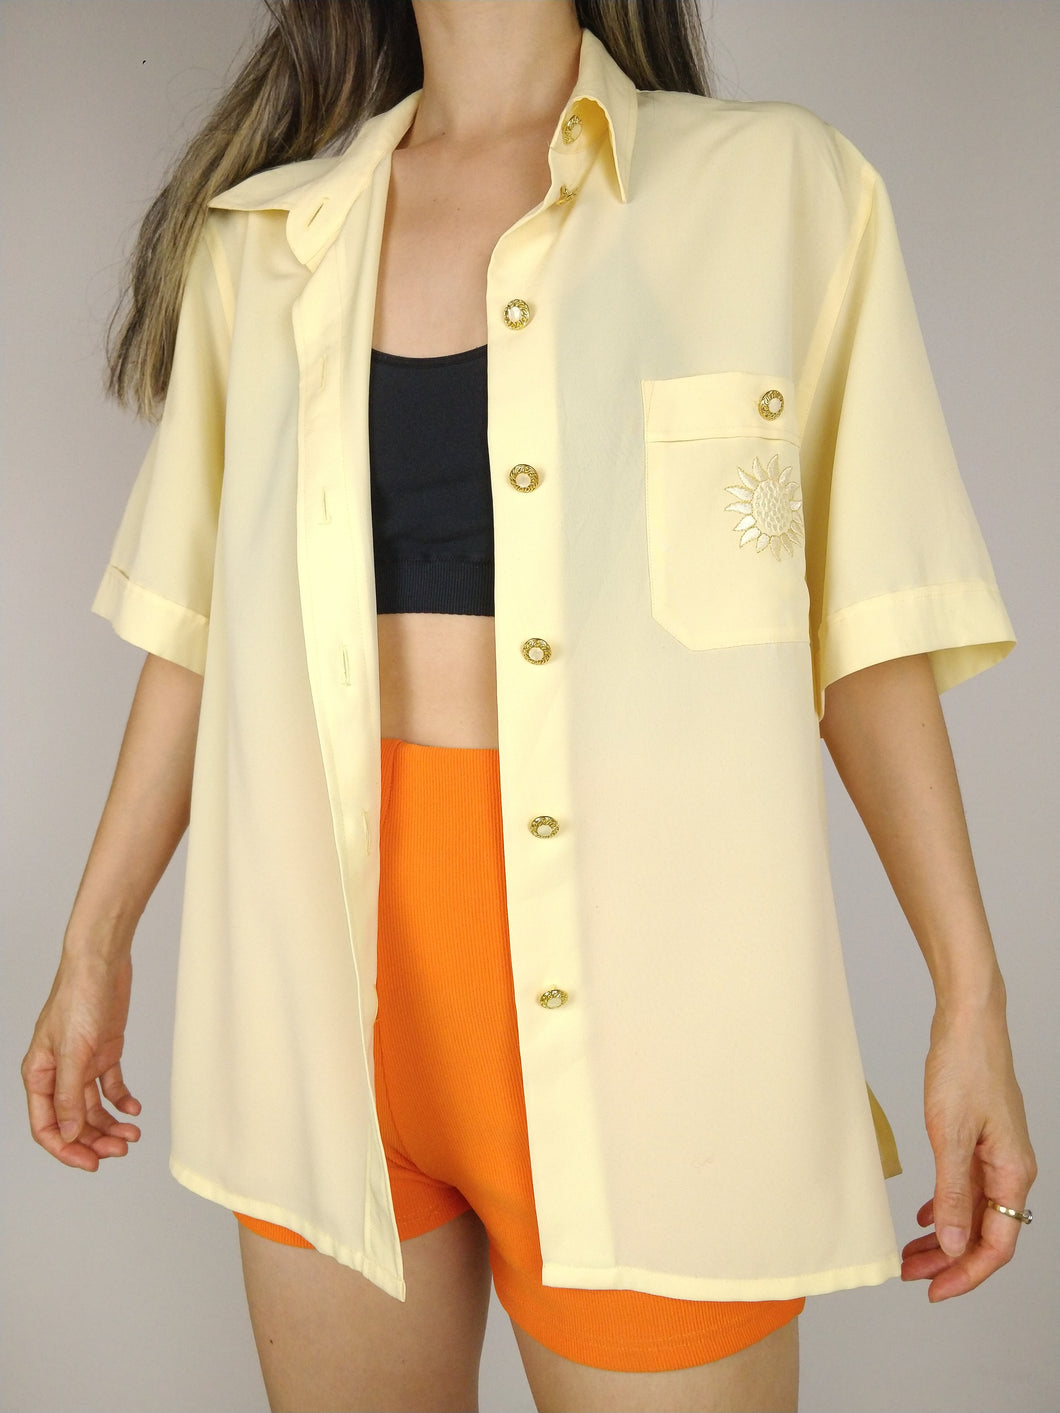 The Sun Shirt | Vintage pastel yellow short sleeve blouse embroidery M-L